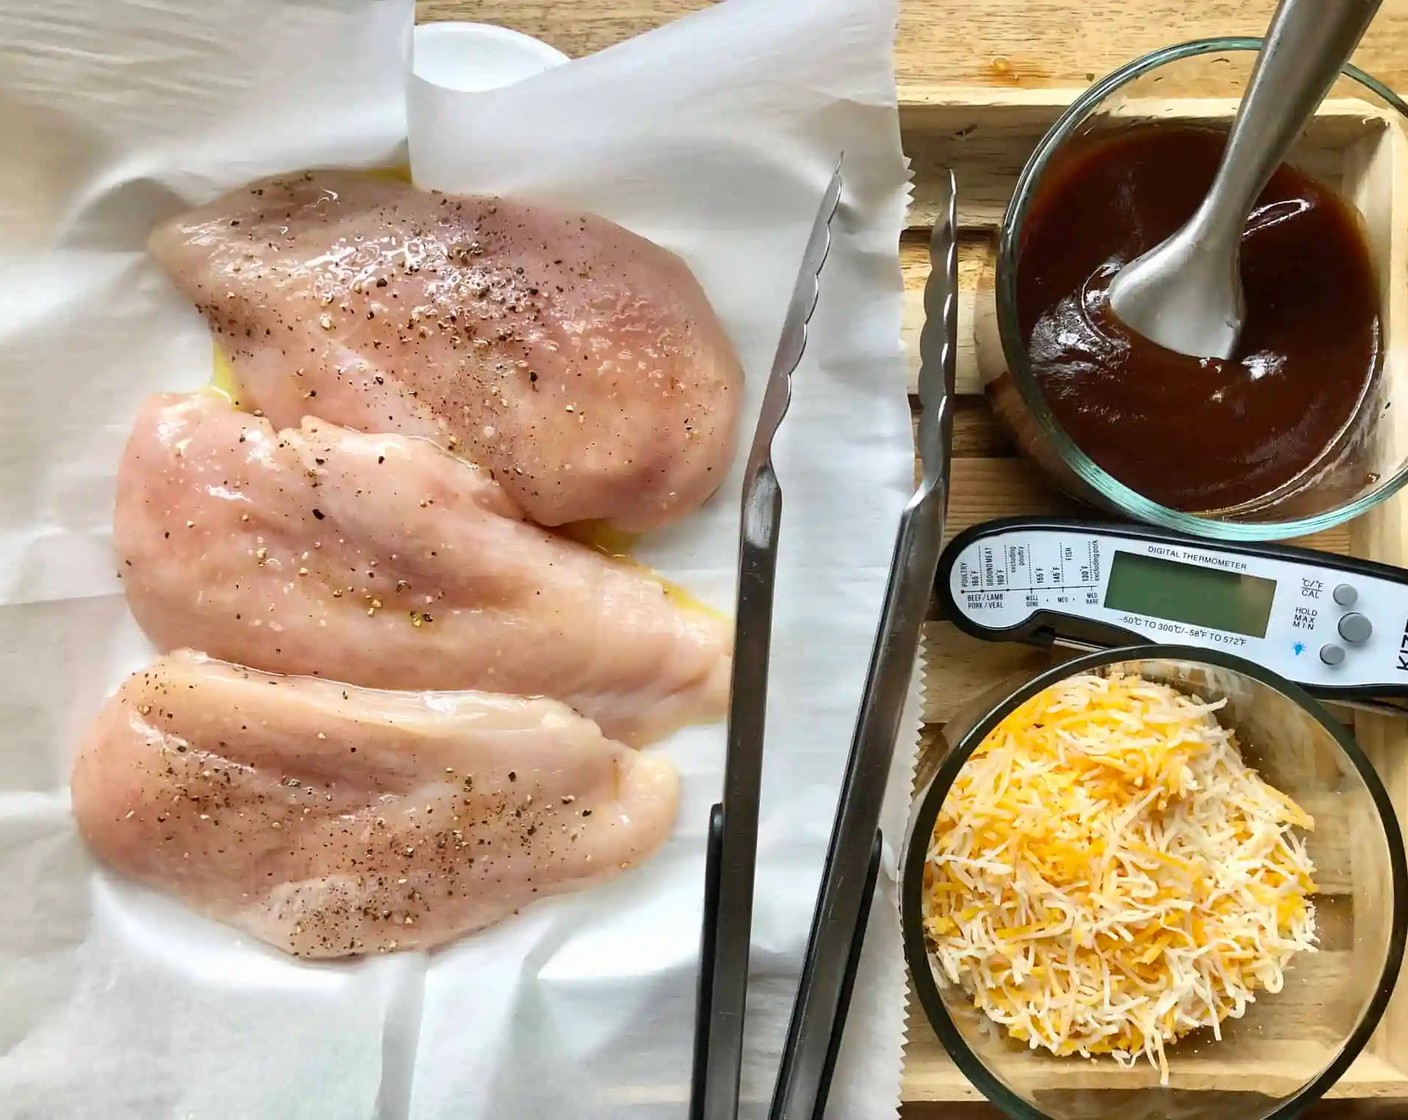 step 1 Remove Boneless, Skinless Chicken Breasts (3) from the refrigerator. Brush all over with Olive Oil (as needed). and season both sides with Coarse Kosher Salt (to taste) and Freshly Ground Black Pepper (to taste). Allow chicken to rest at room temperature for 30 minutes.